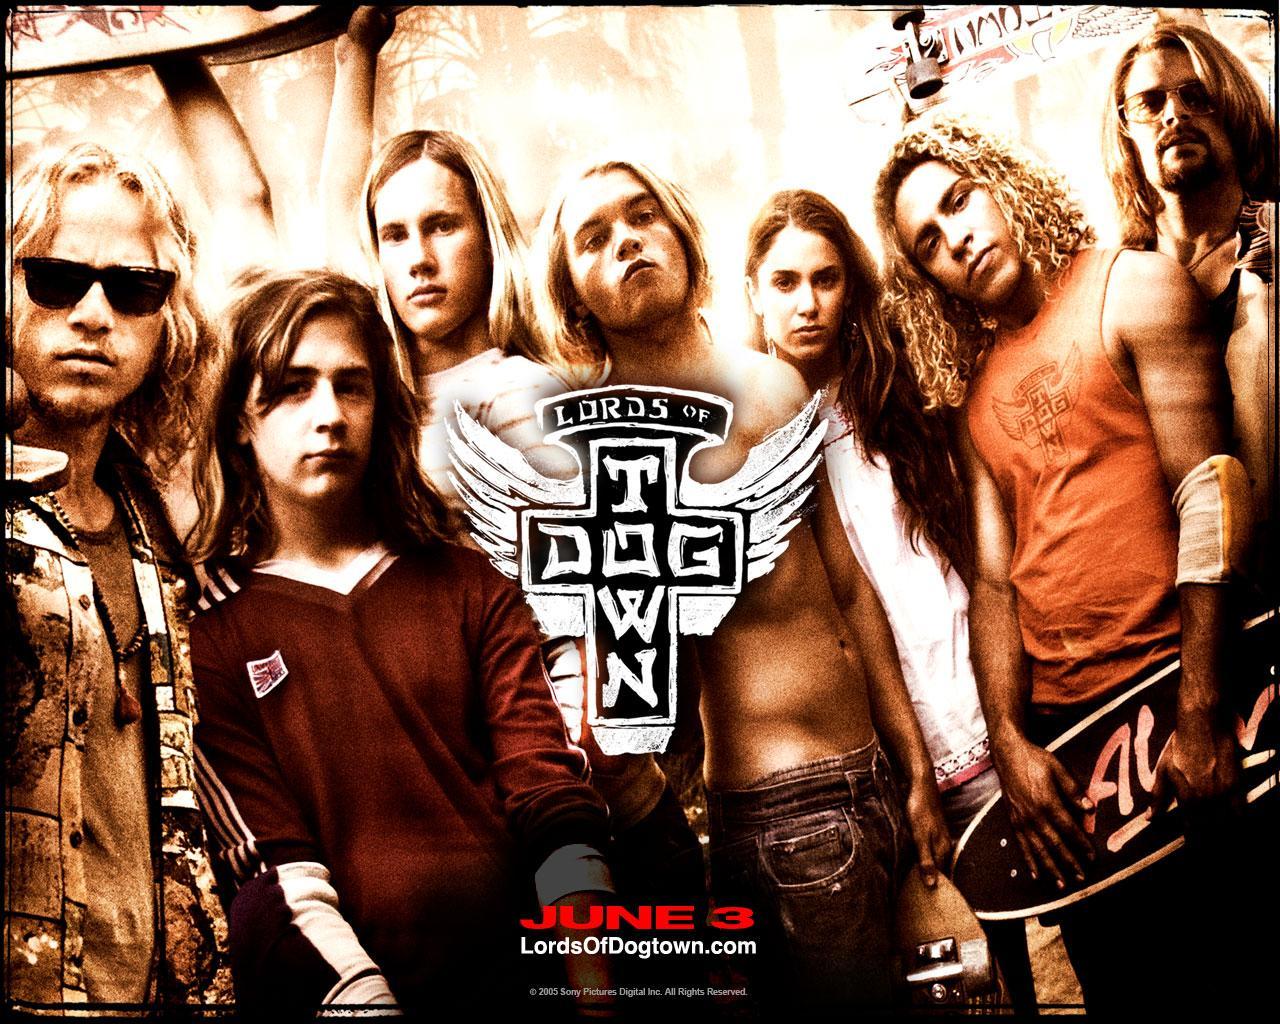 Image Gallery For The Lords Of Dogtown Filmaffinity